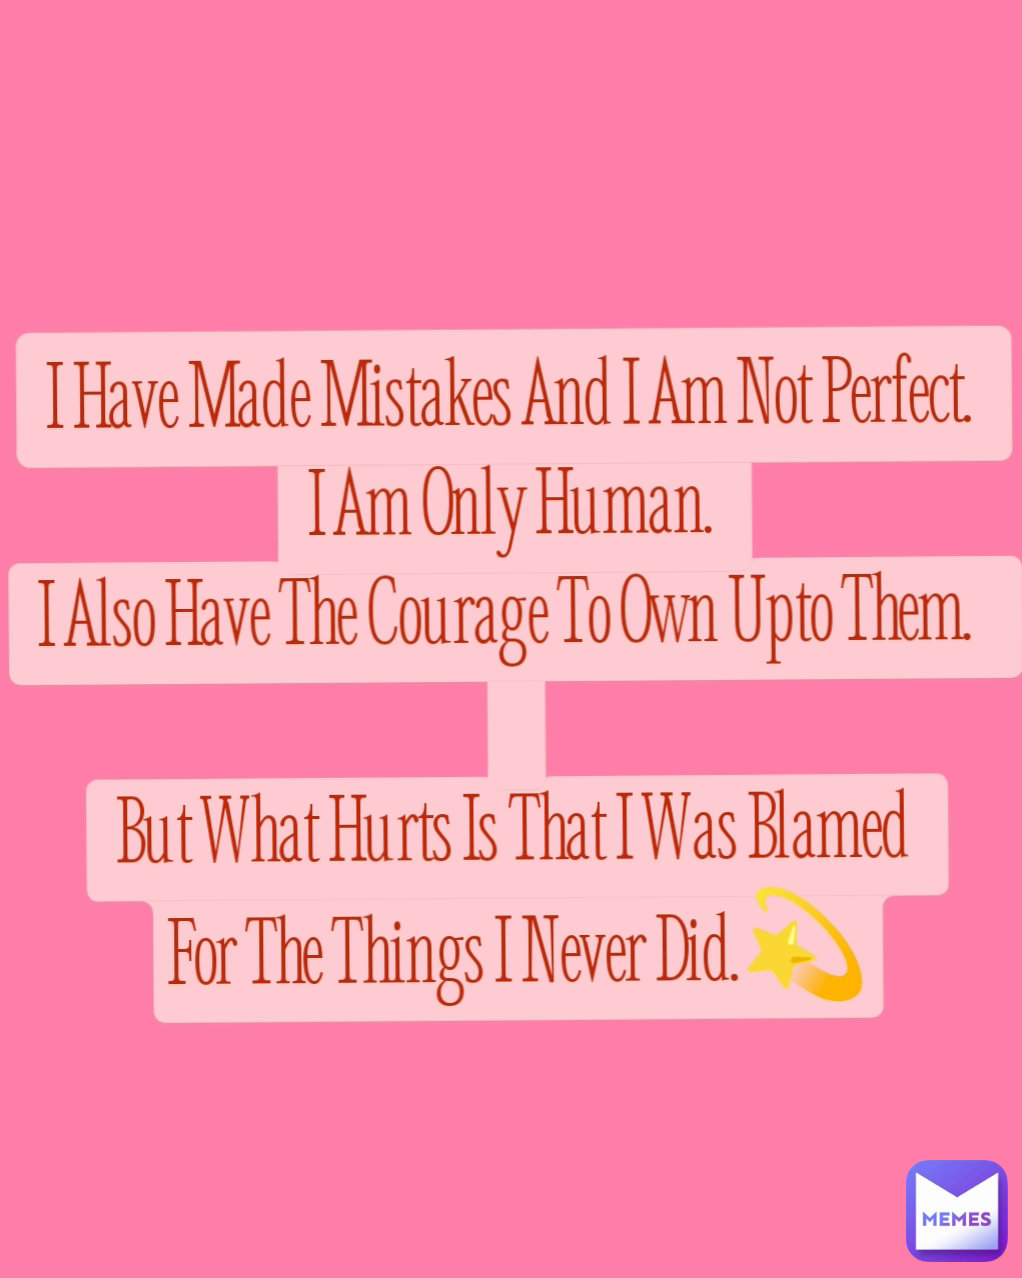 I Have Made Mistakes And I Am Not Perfect. 
I Am Only Human. 
I Also Have The Courage To Own Upto Them.  

But What Hurts Is That I Was Blamed 
For The Things I Never Did.💫